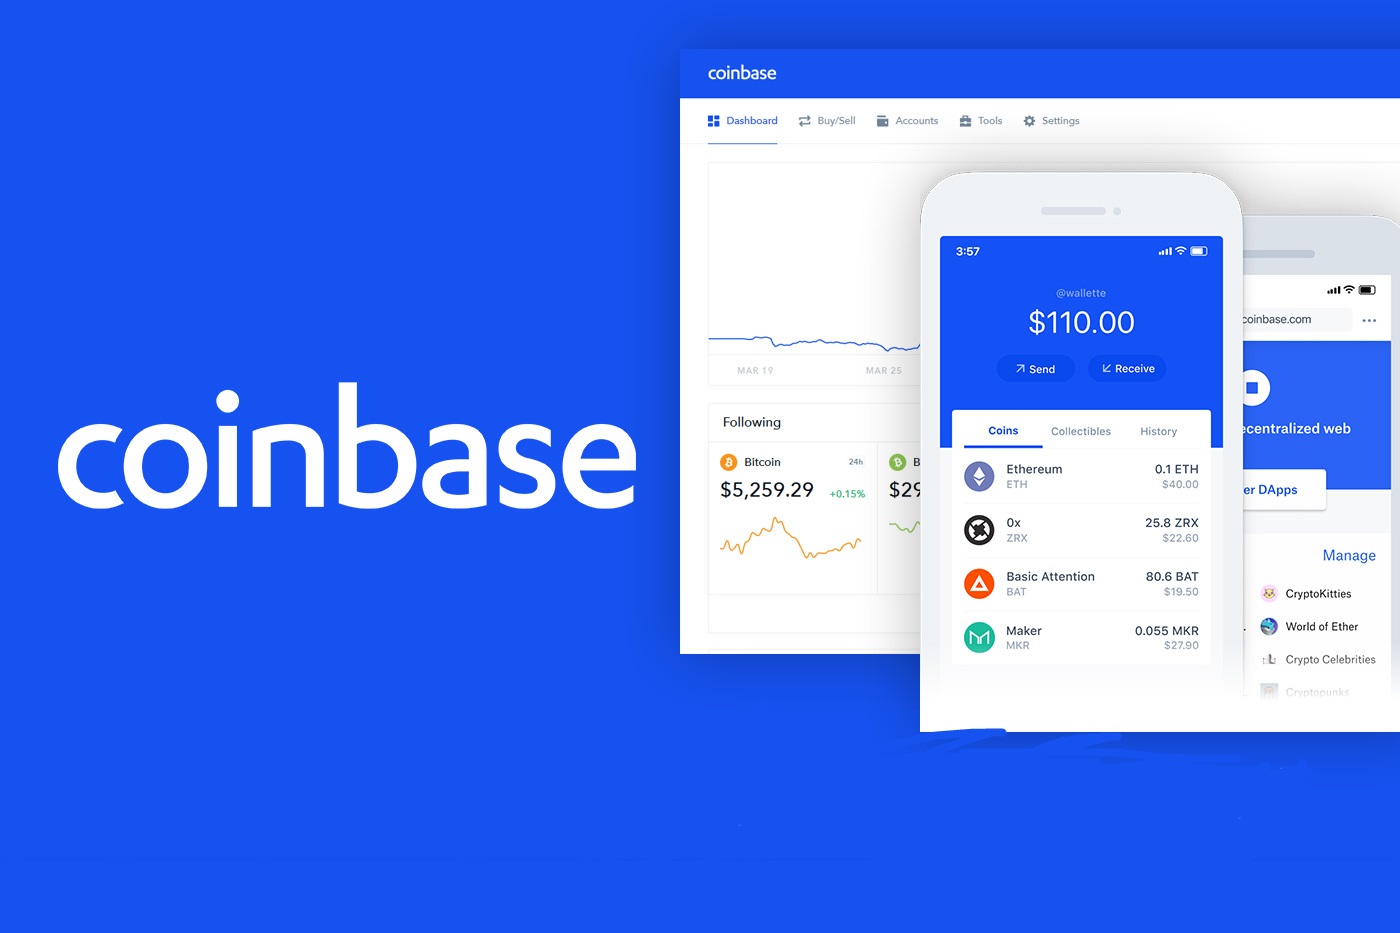 18 New Cryptocurrencies Supported By Coinbase - Zecripto